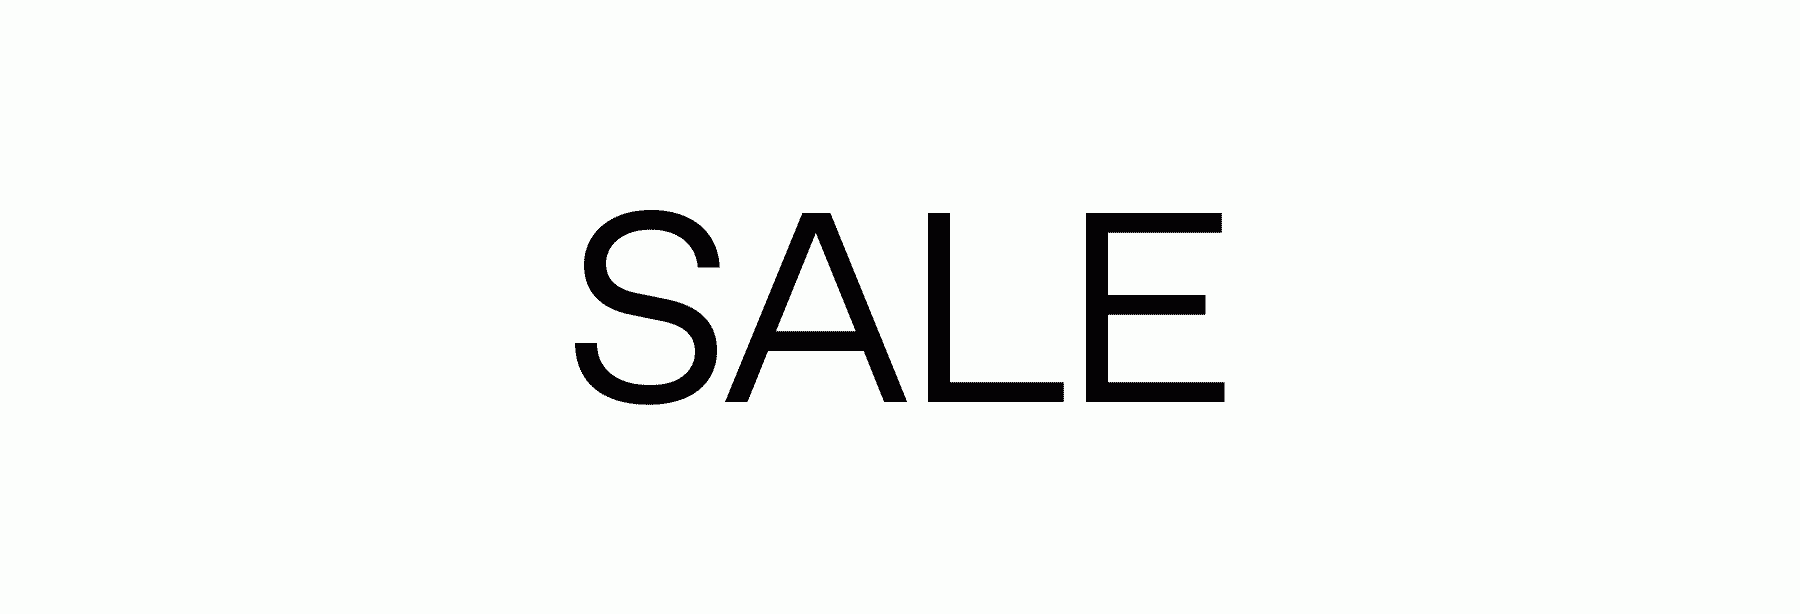 SALE: Up to 70% Off, Final Hours